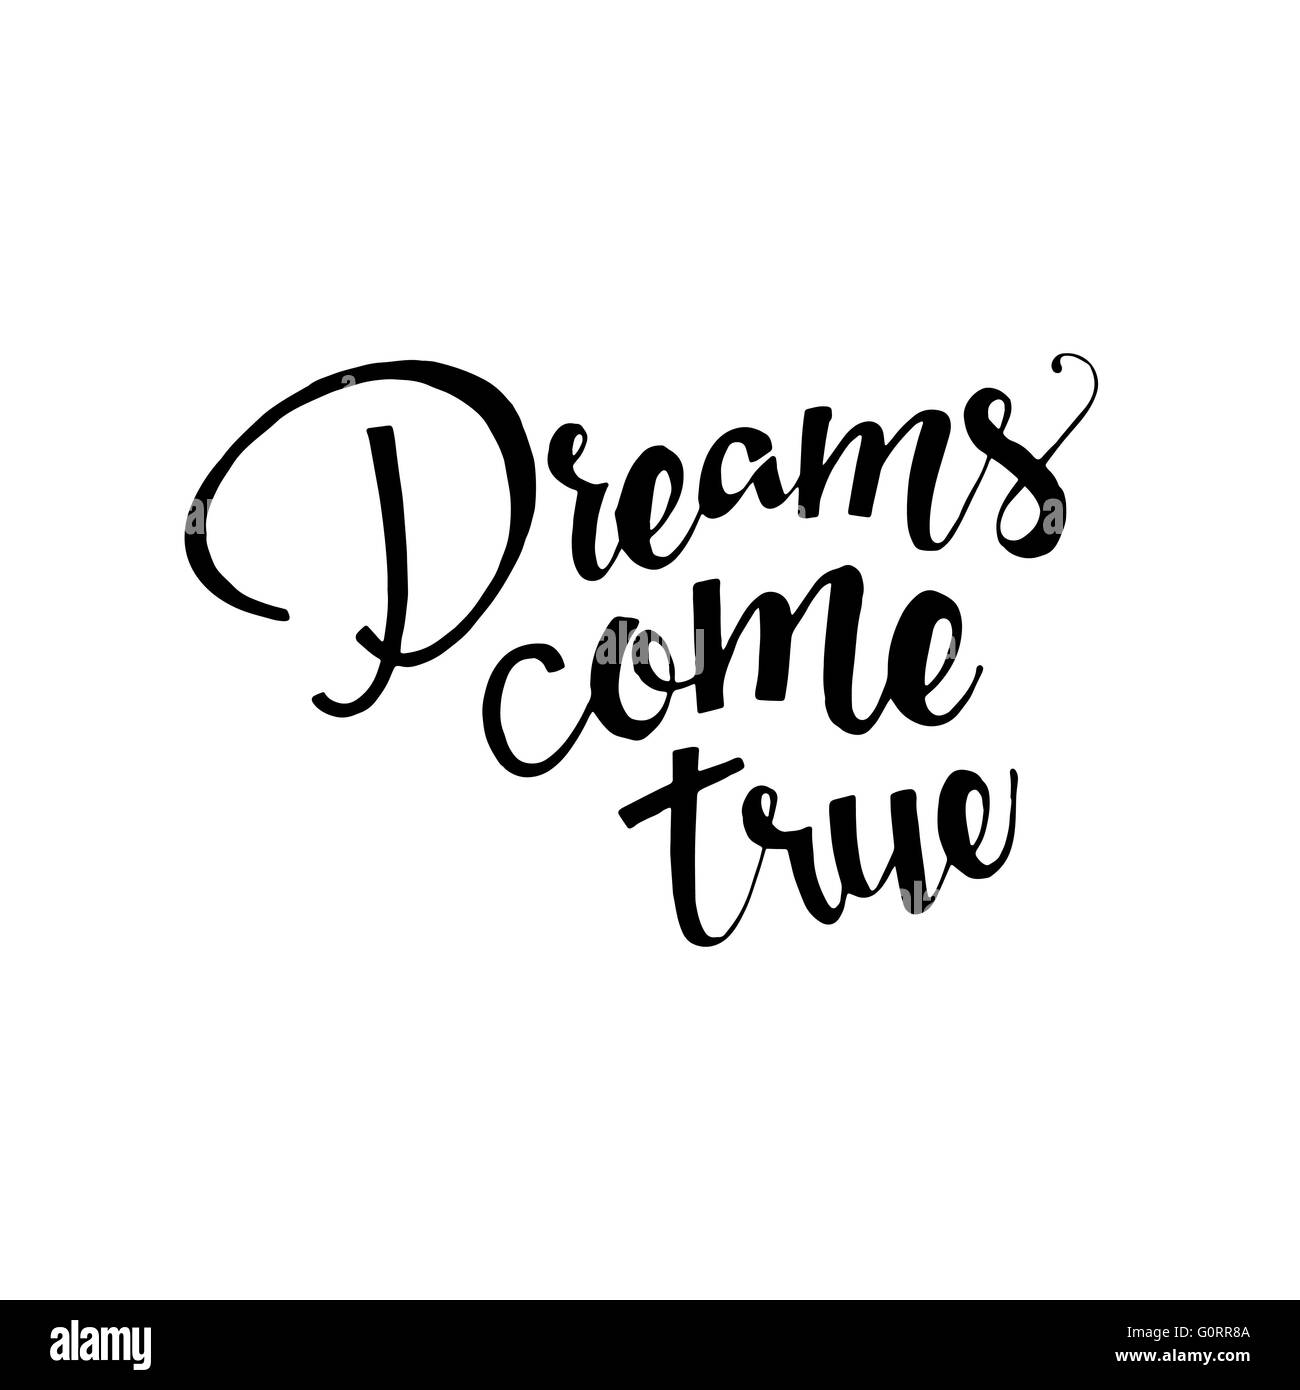 Dreams come true phrase. Handwritten lettering. Inspirational quote. Modern Calligraphy Stock Vector